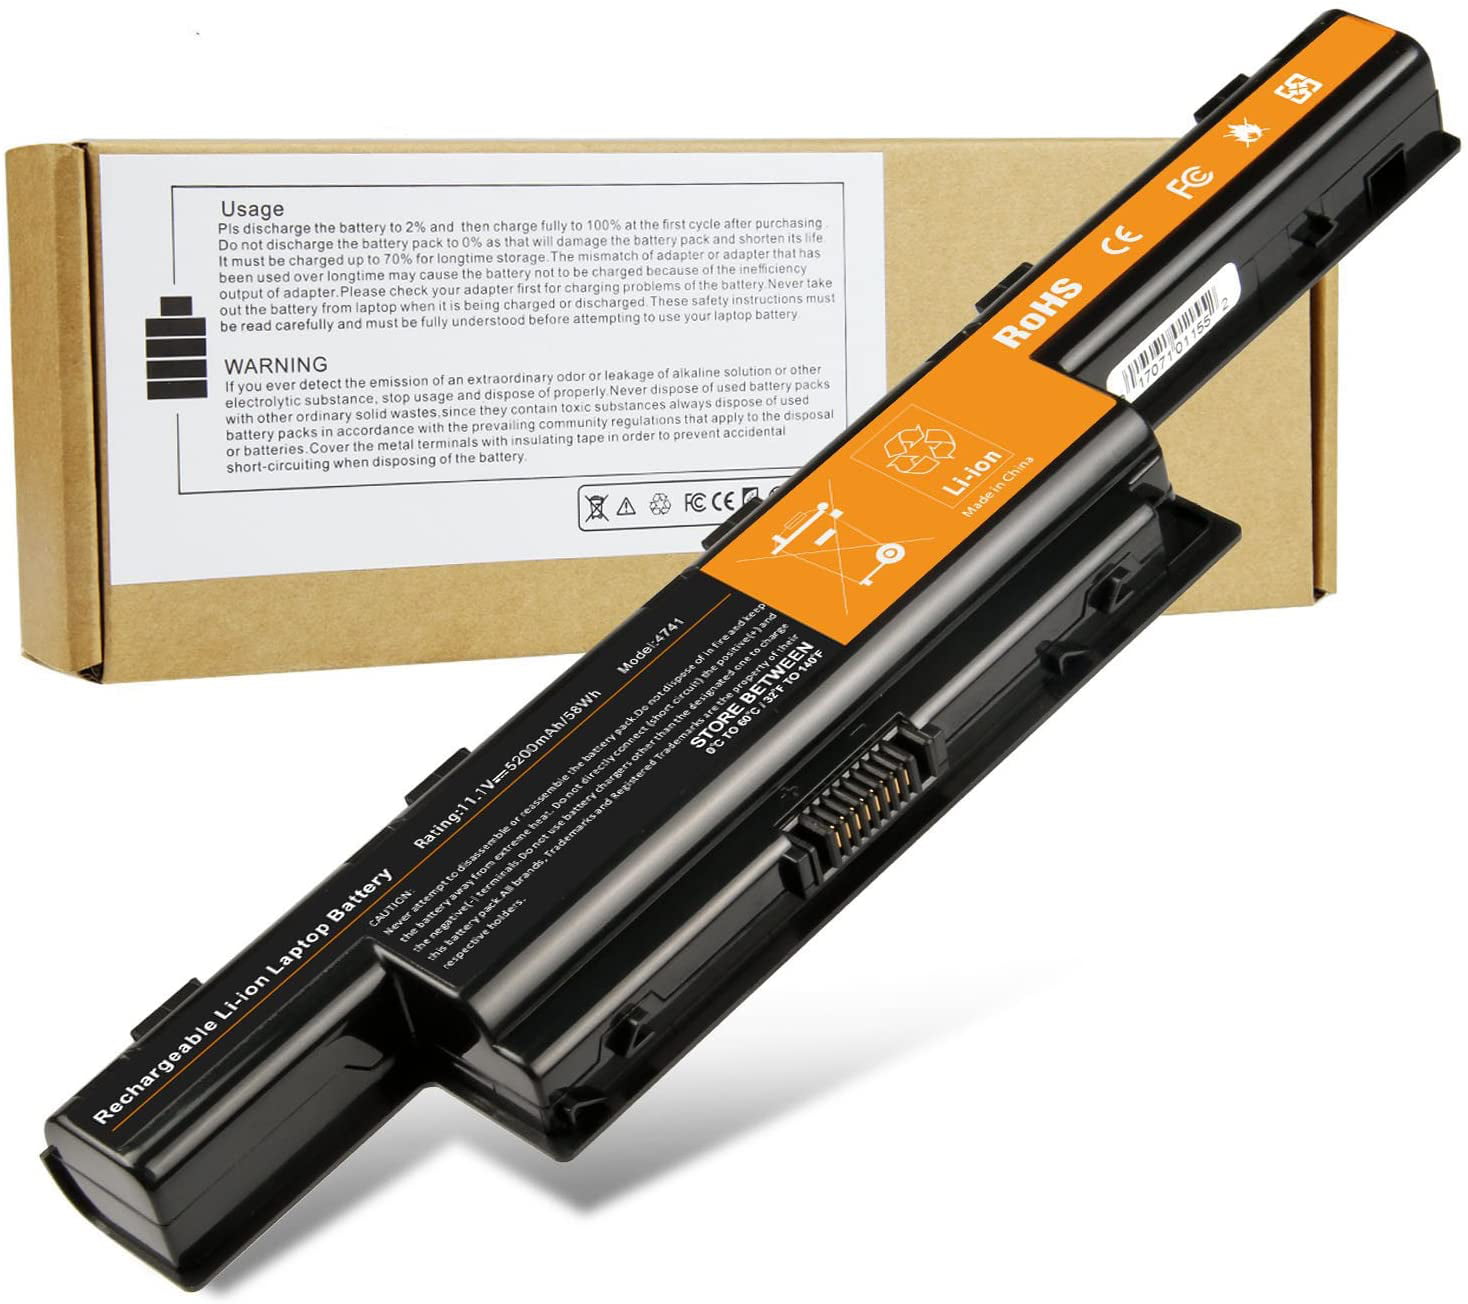 AS10D31 AS10D51 Laptop Battery for ACER Aspire 4253, 4750, 4551, 4552,  4738, , 4771, 5251, 5253, 5542, 5551, 5552, 5560, 5733, 5741, 5742, 5750,  7551, 7552, 7560, 7741, 7750, AS5741 Series 